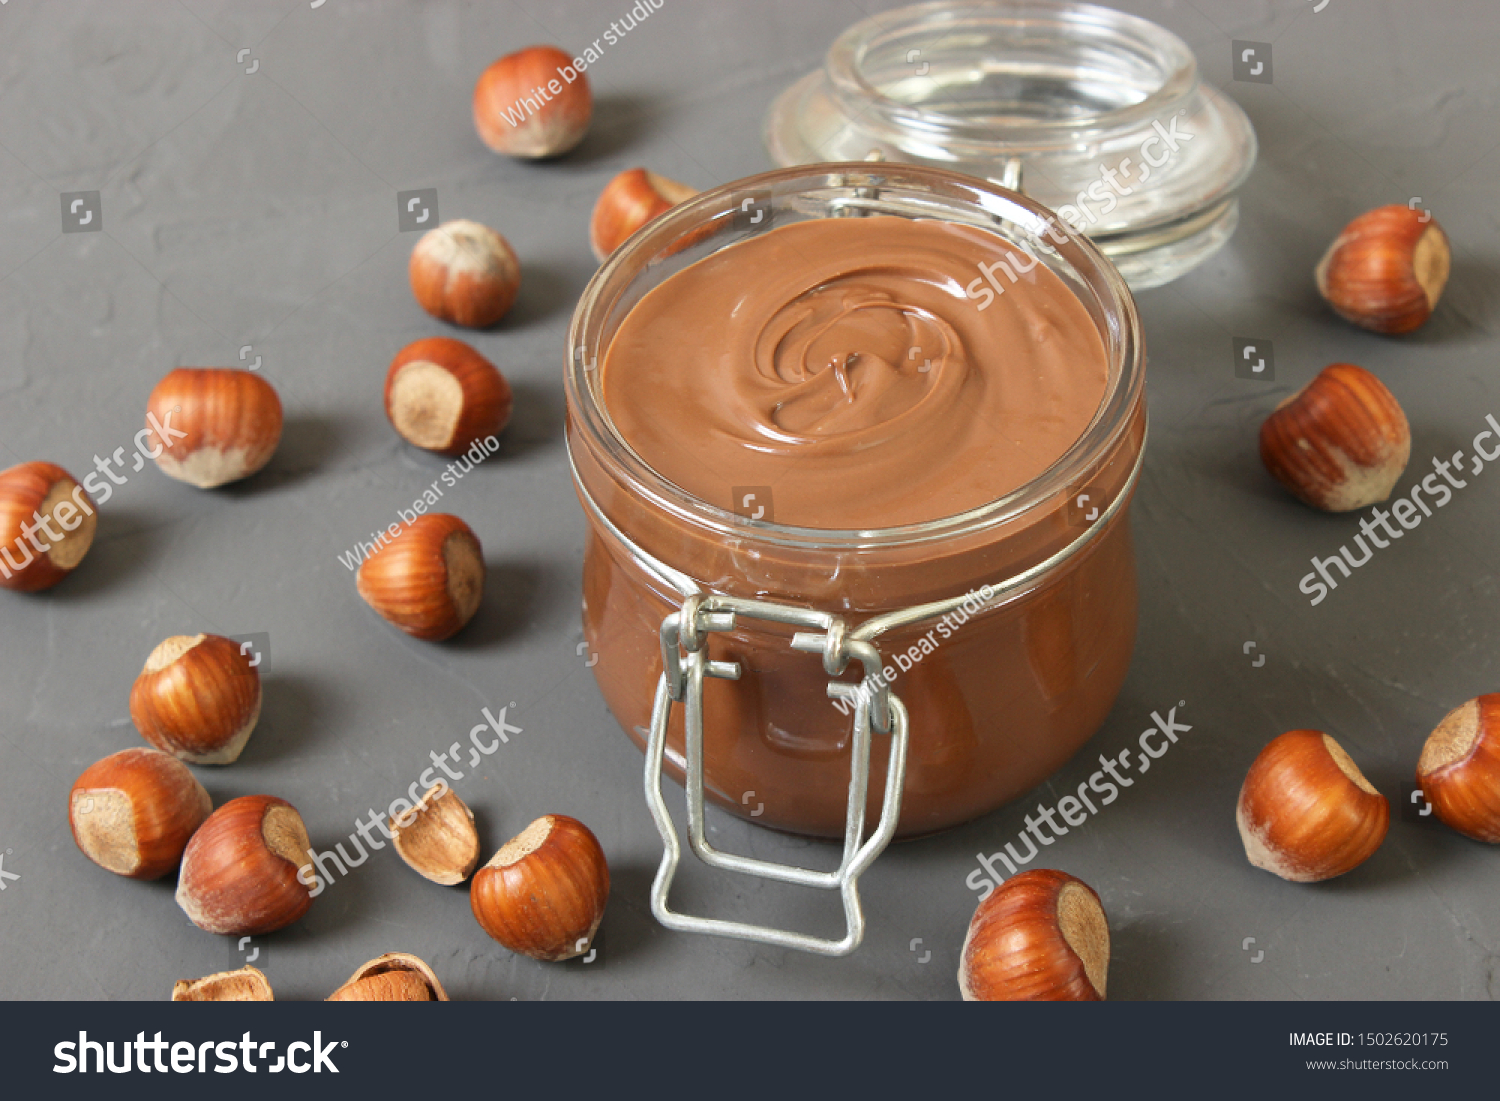 Download Chocolate Paste Glass Jar On Colored Stock Photo Edit Now 1502620175 PSD Mockup Templates